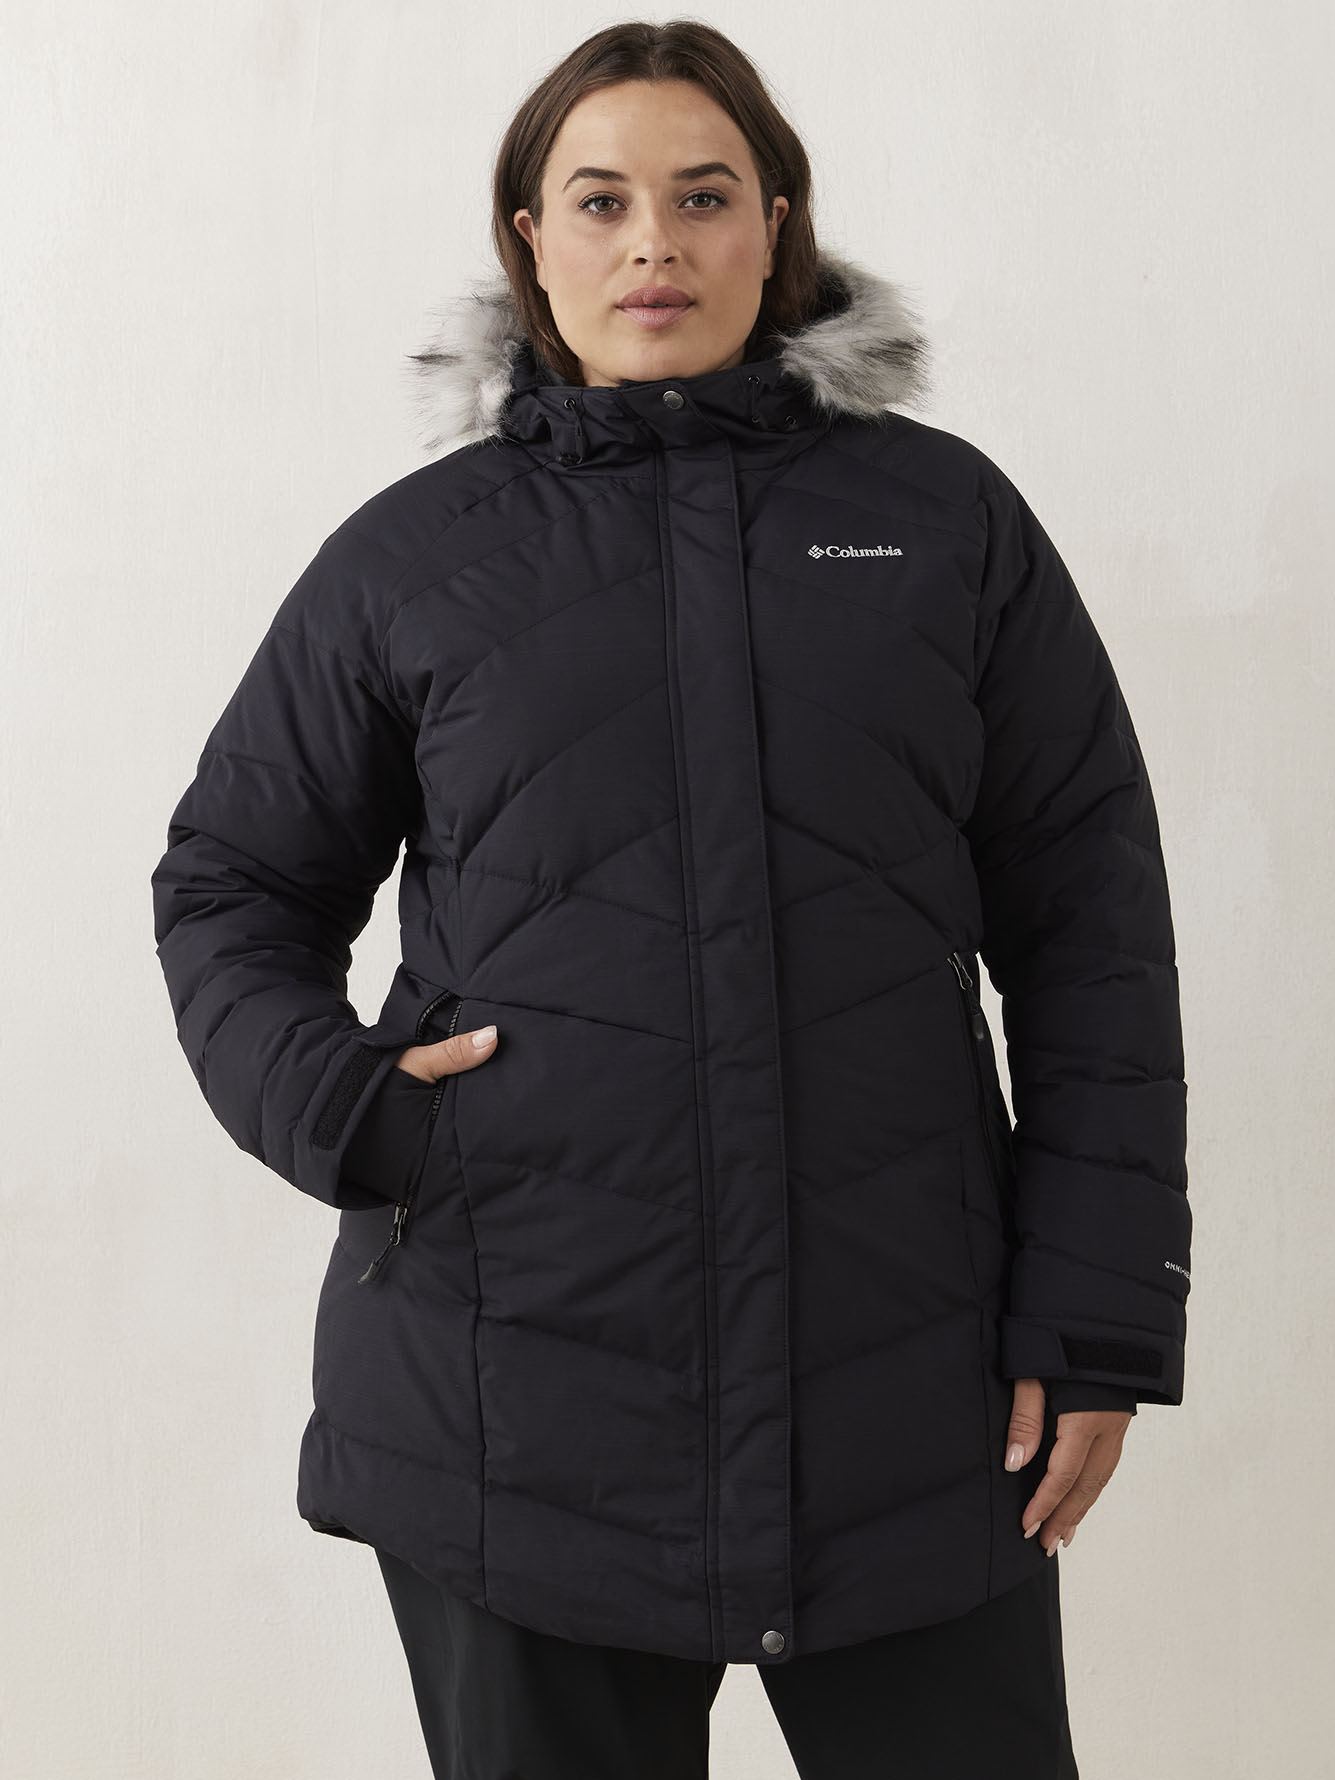 Soap interior Incorporate Lay D Down II Mid Jacket - Columbia | Penningtons